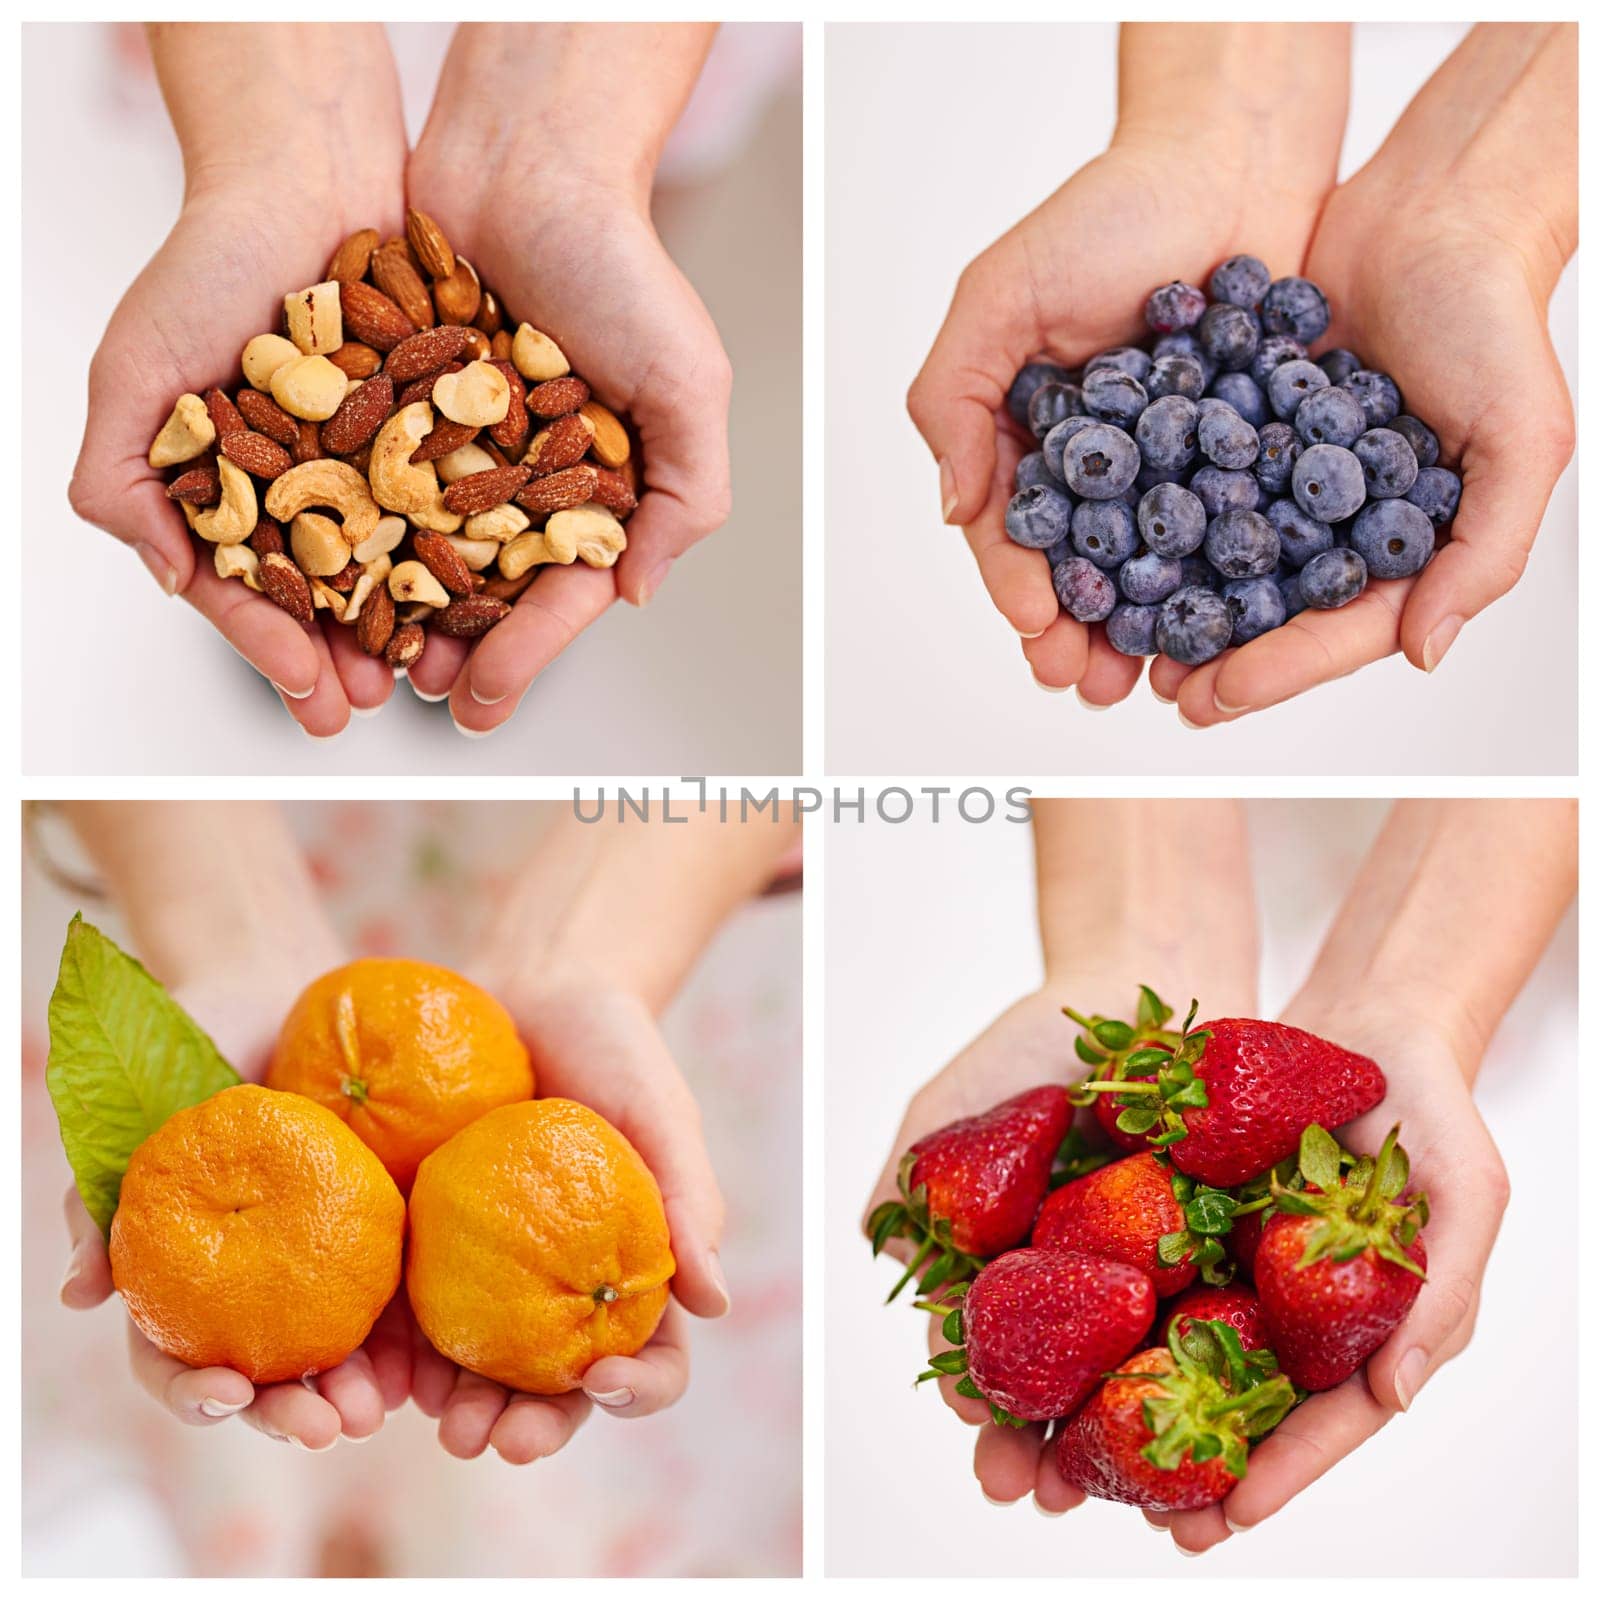 Collage, fruit and hands for healthy choice, nutrition and detox for wellness, vegan and nutrients. Nuts, blueberries and tangerine with strawberry for antioxidant, vitamin c and diet on composite.